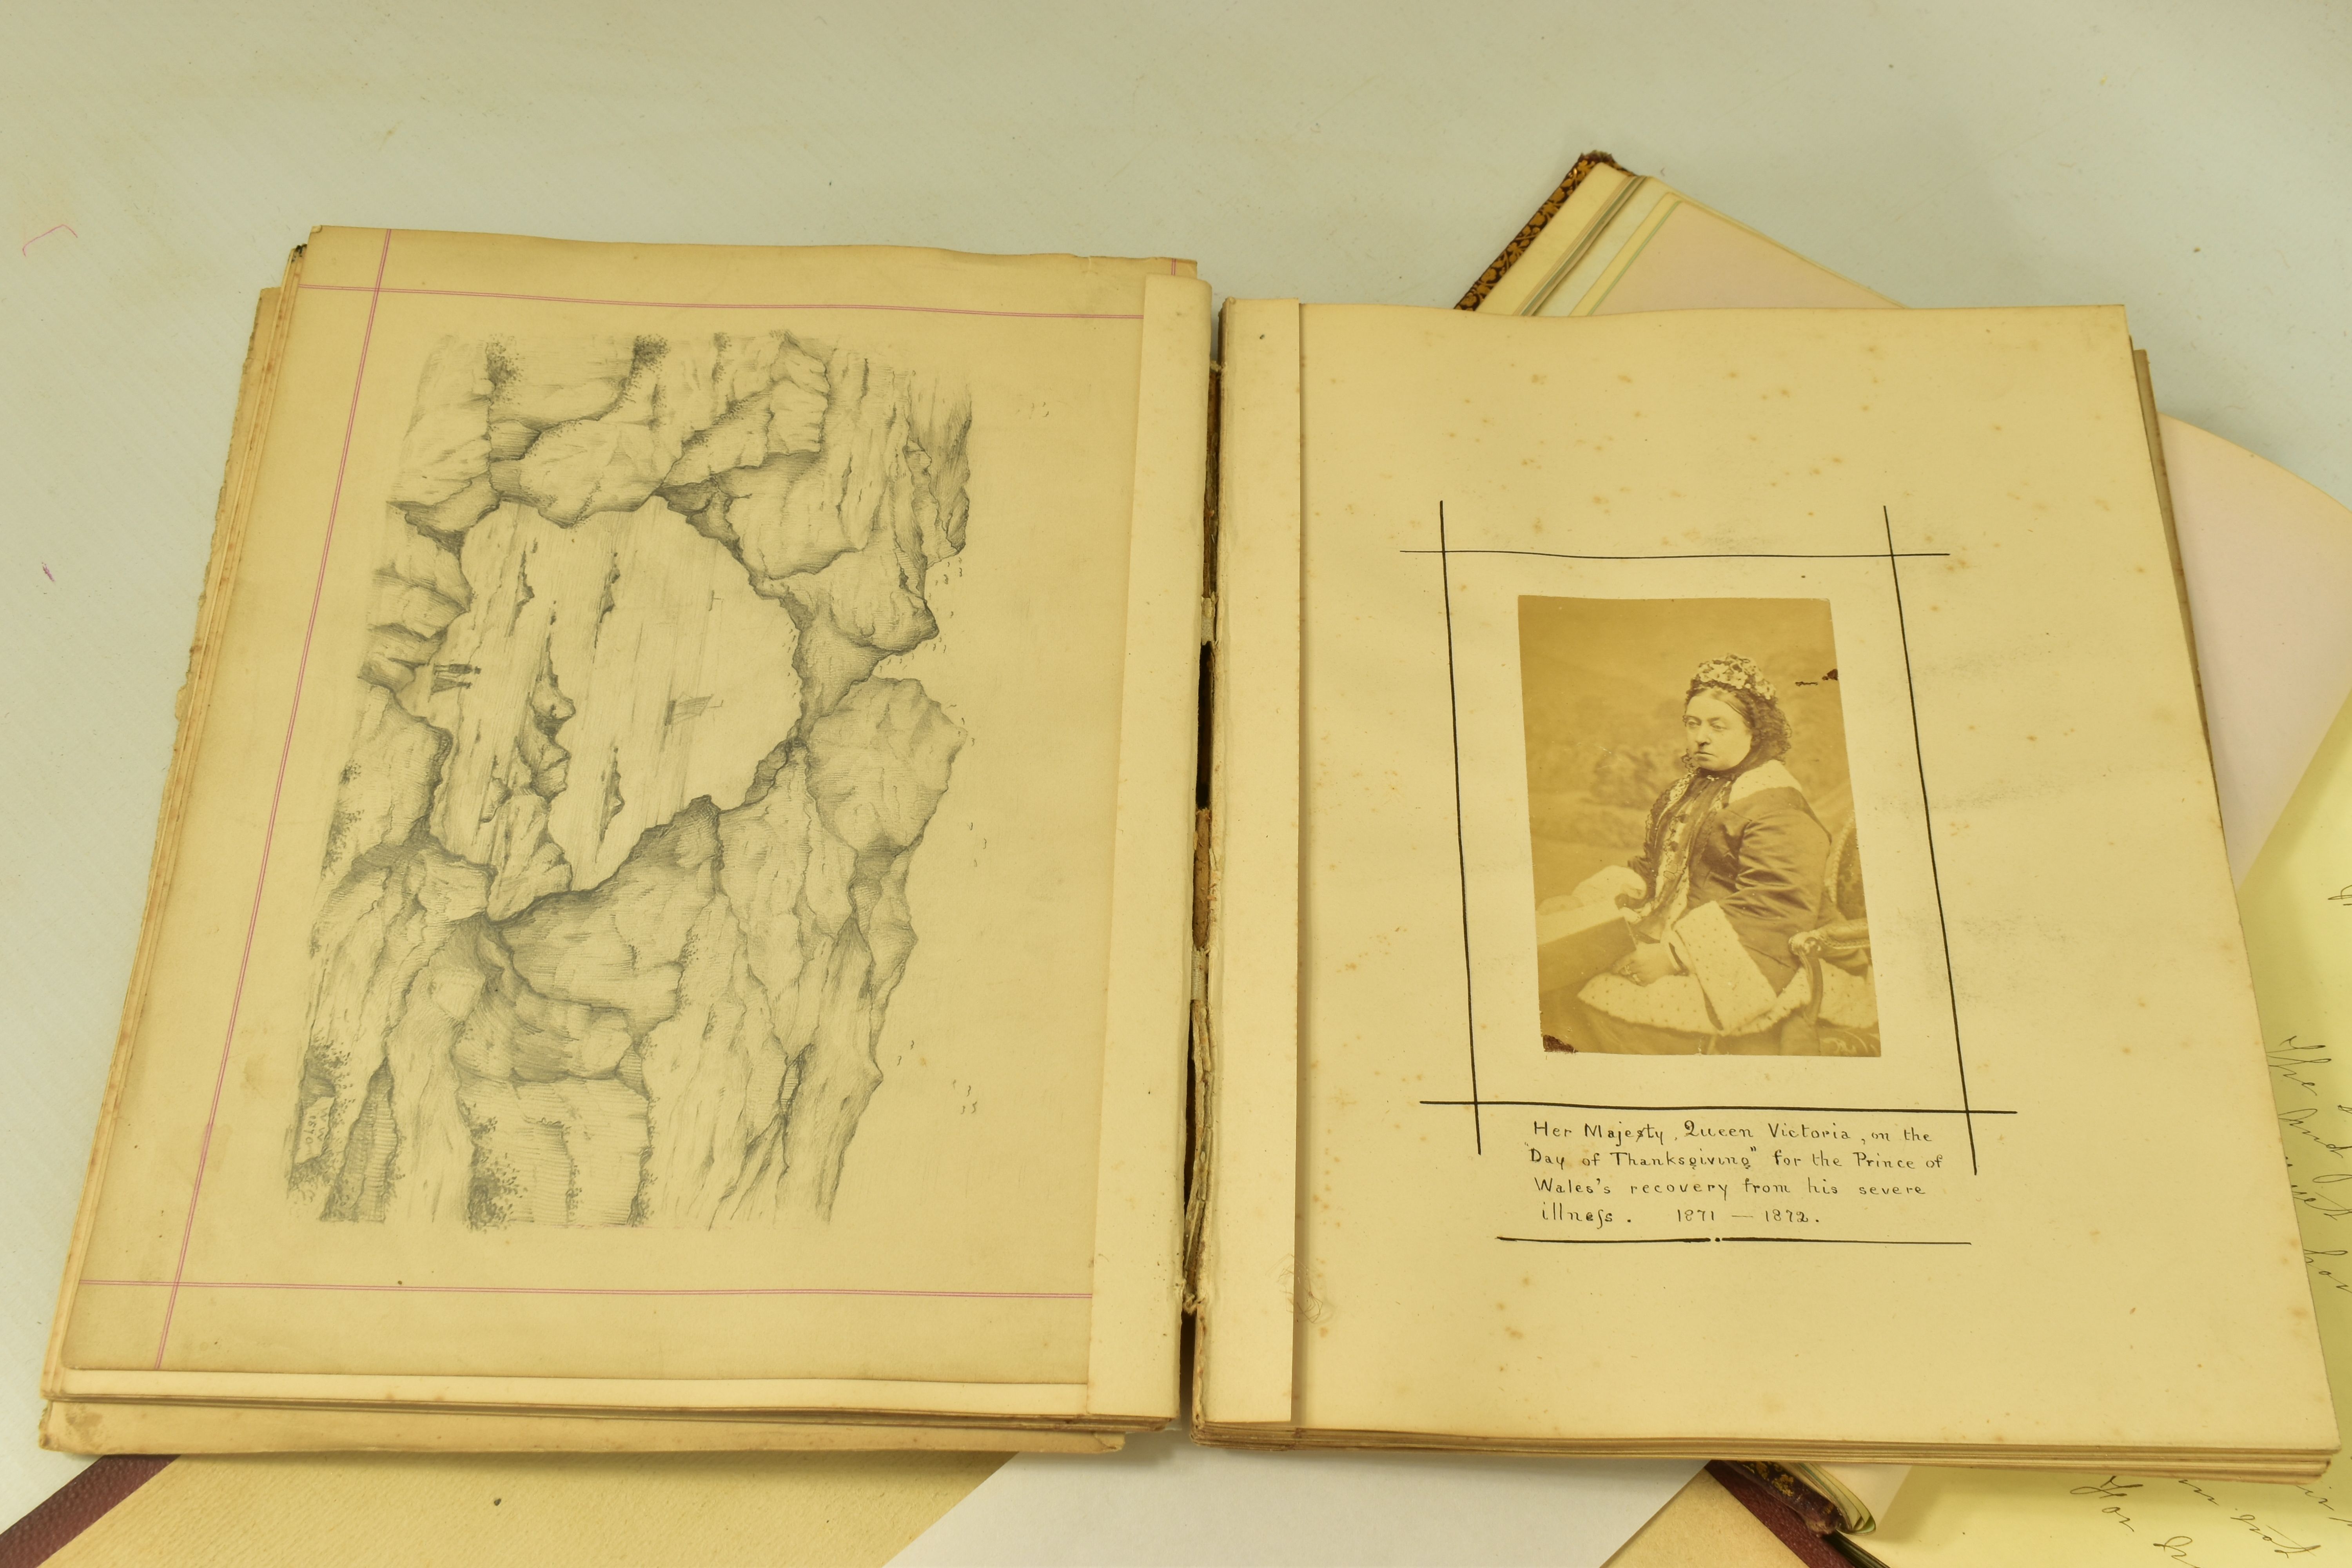 VICTORIAN SCRAPBOOKS, three Victorian Scrapbooks featuring pressed flowers, artwork, observations, - Image 2 of 8